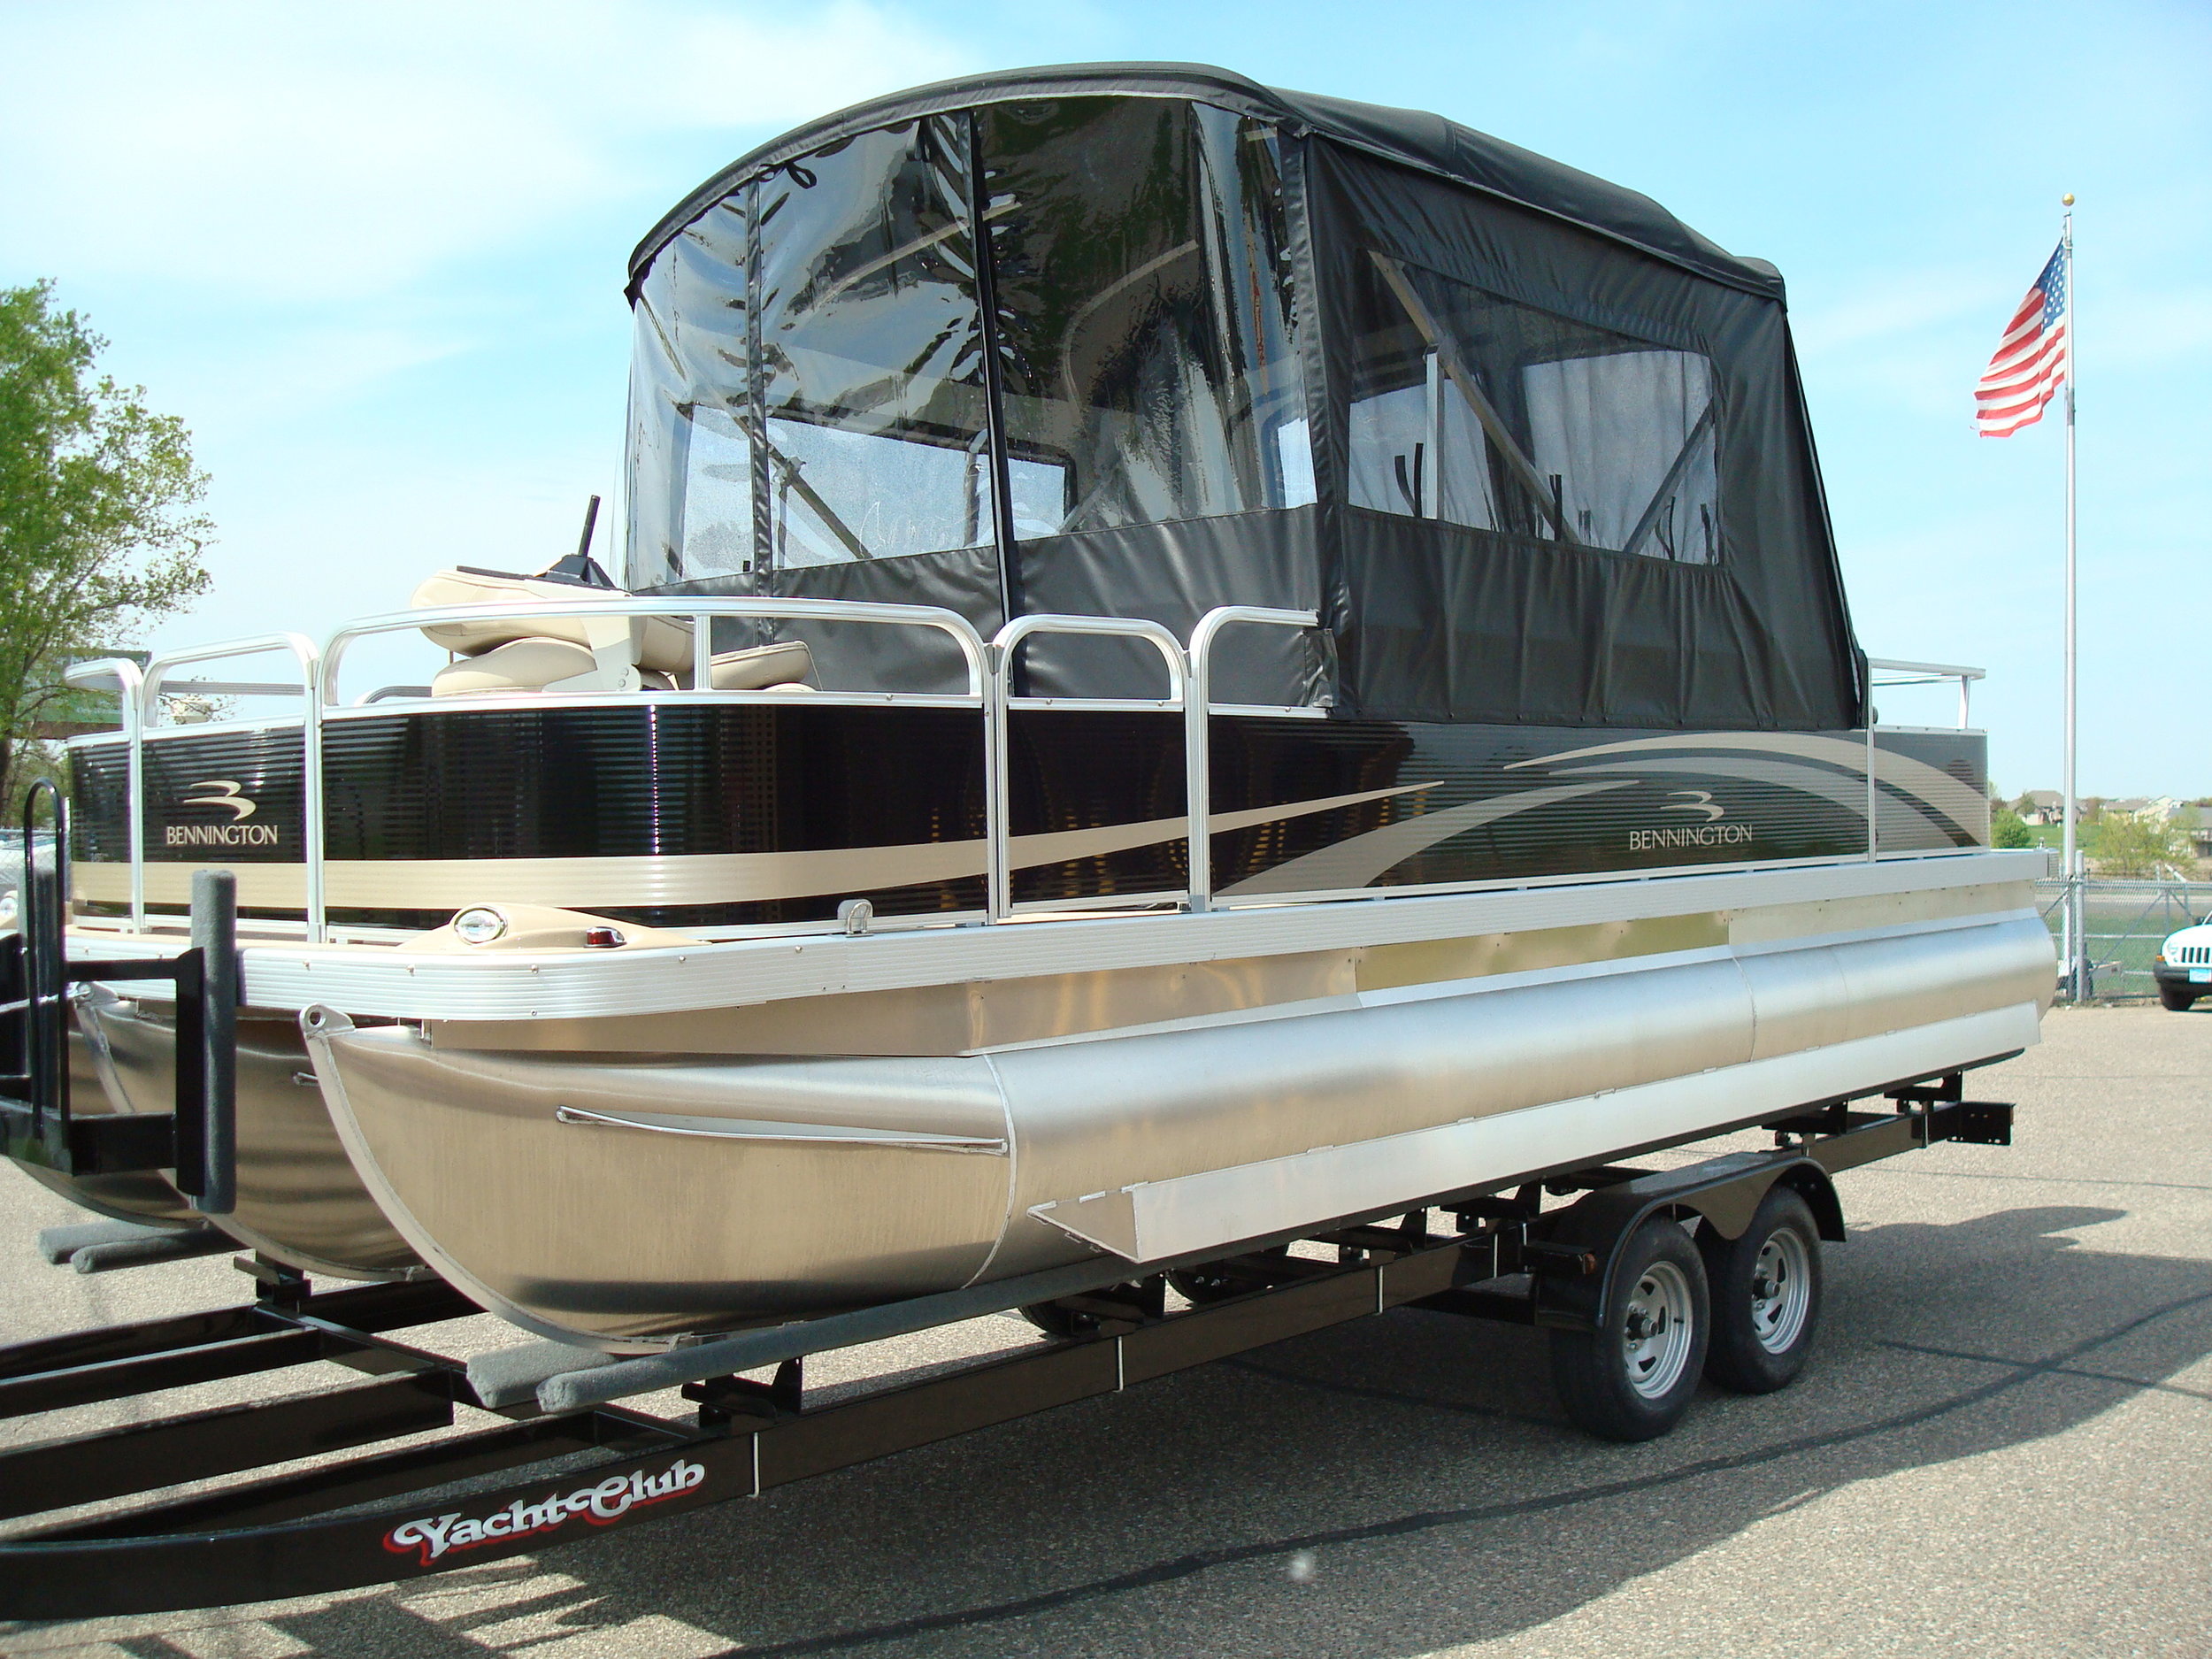 How Much Does A Pontoon Boat Weigh?